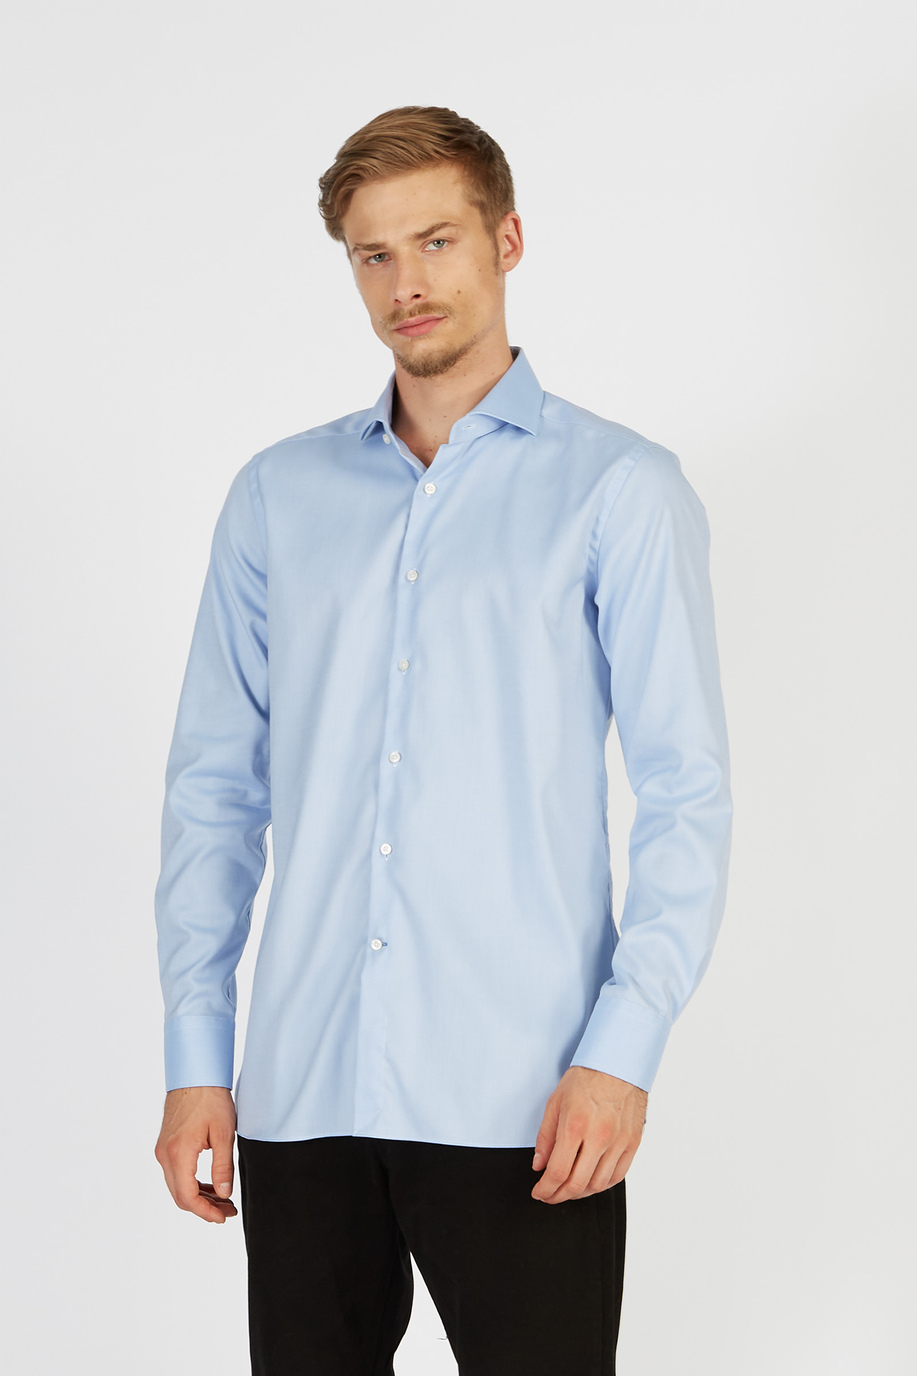 Classic style shirt for men in long-sleeved cotton - Paternò - Elegant looks for him | La Martina - Official Online Shop